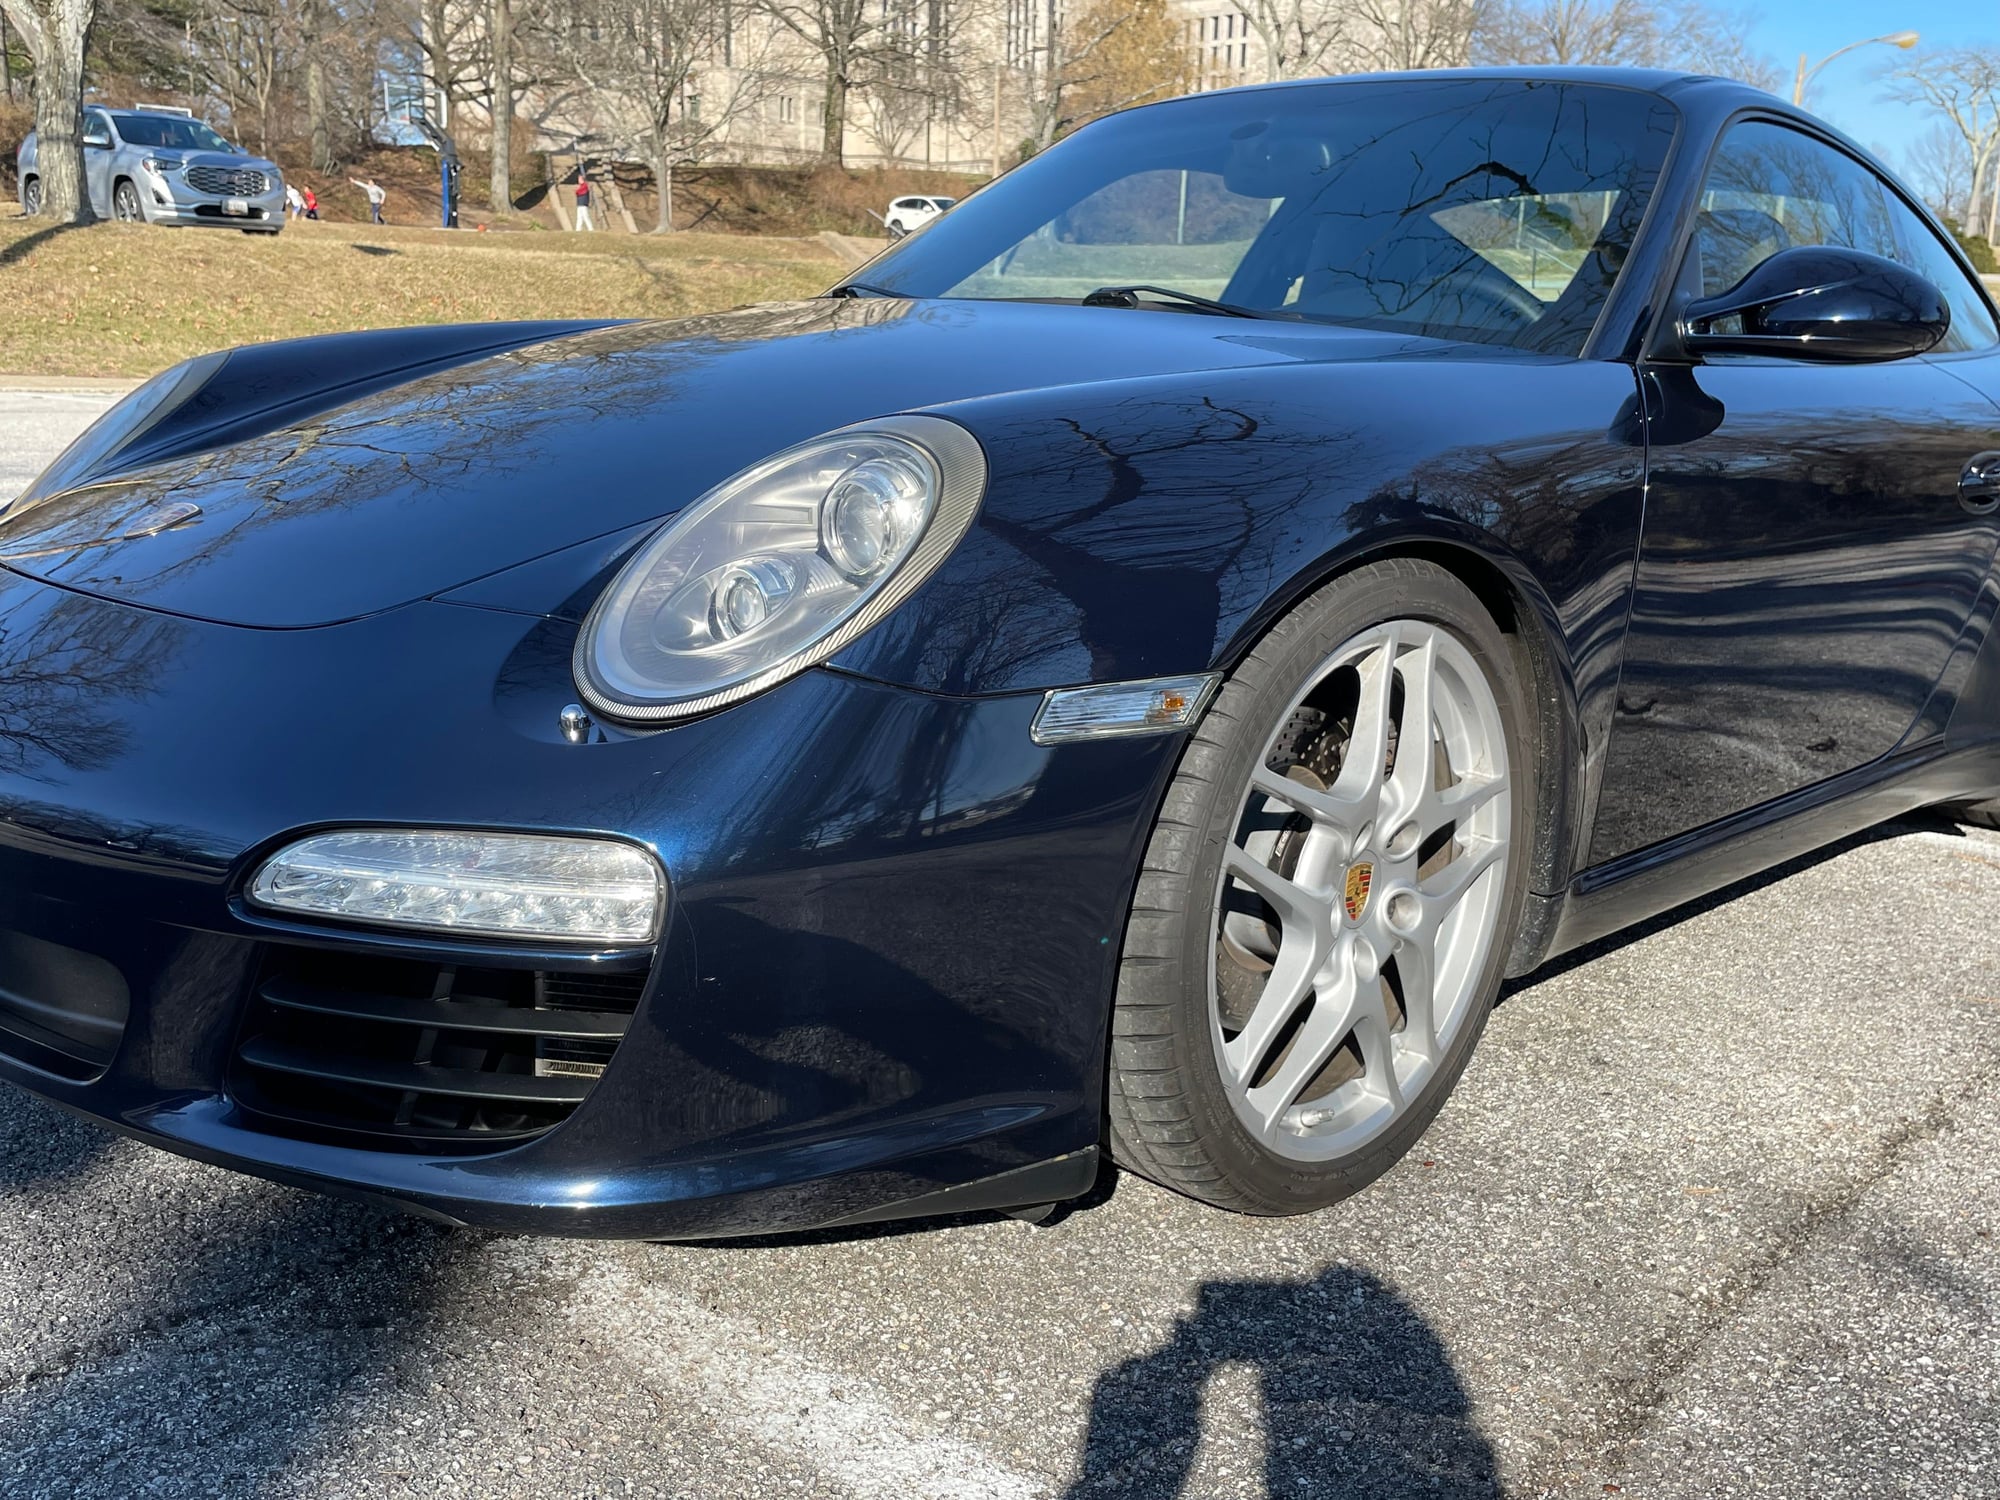 2009 Porsche 911 - 2009 911 Carrera 997.2 6MT Midnight Blue - Used - VIN WP0AA29949S707408 - 99,700 Miles - 6 cyl - 2WD - Manual - Coupe - Blue - Baltimore, MD 21212, United States